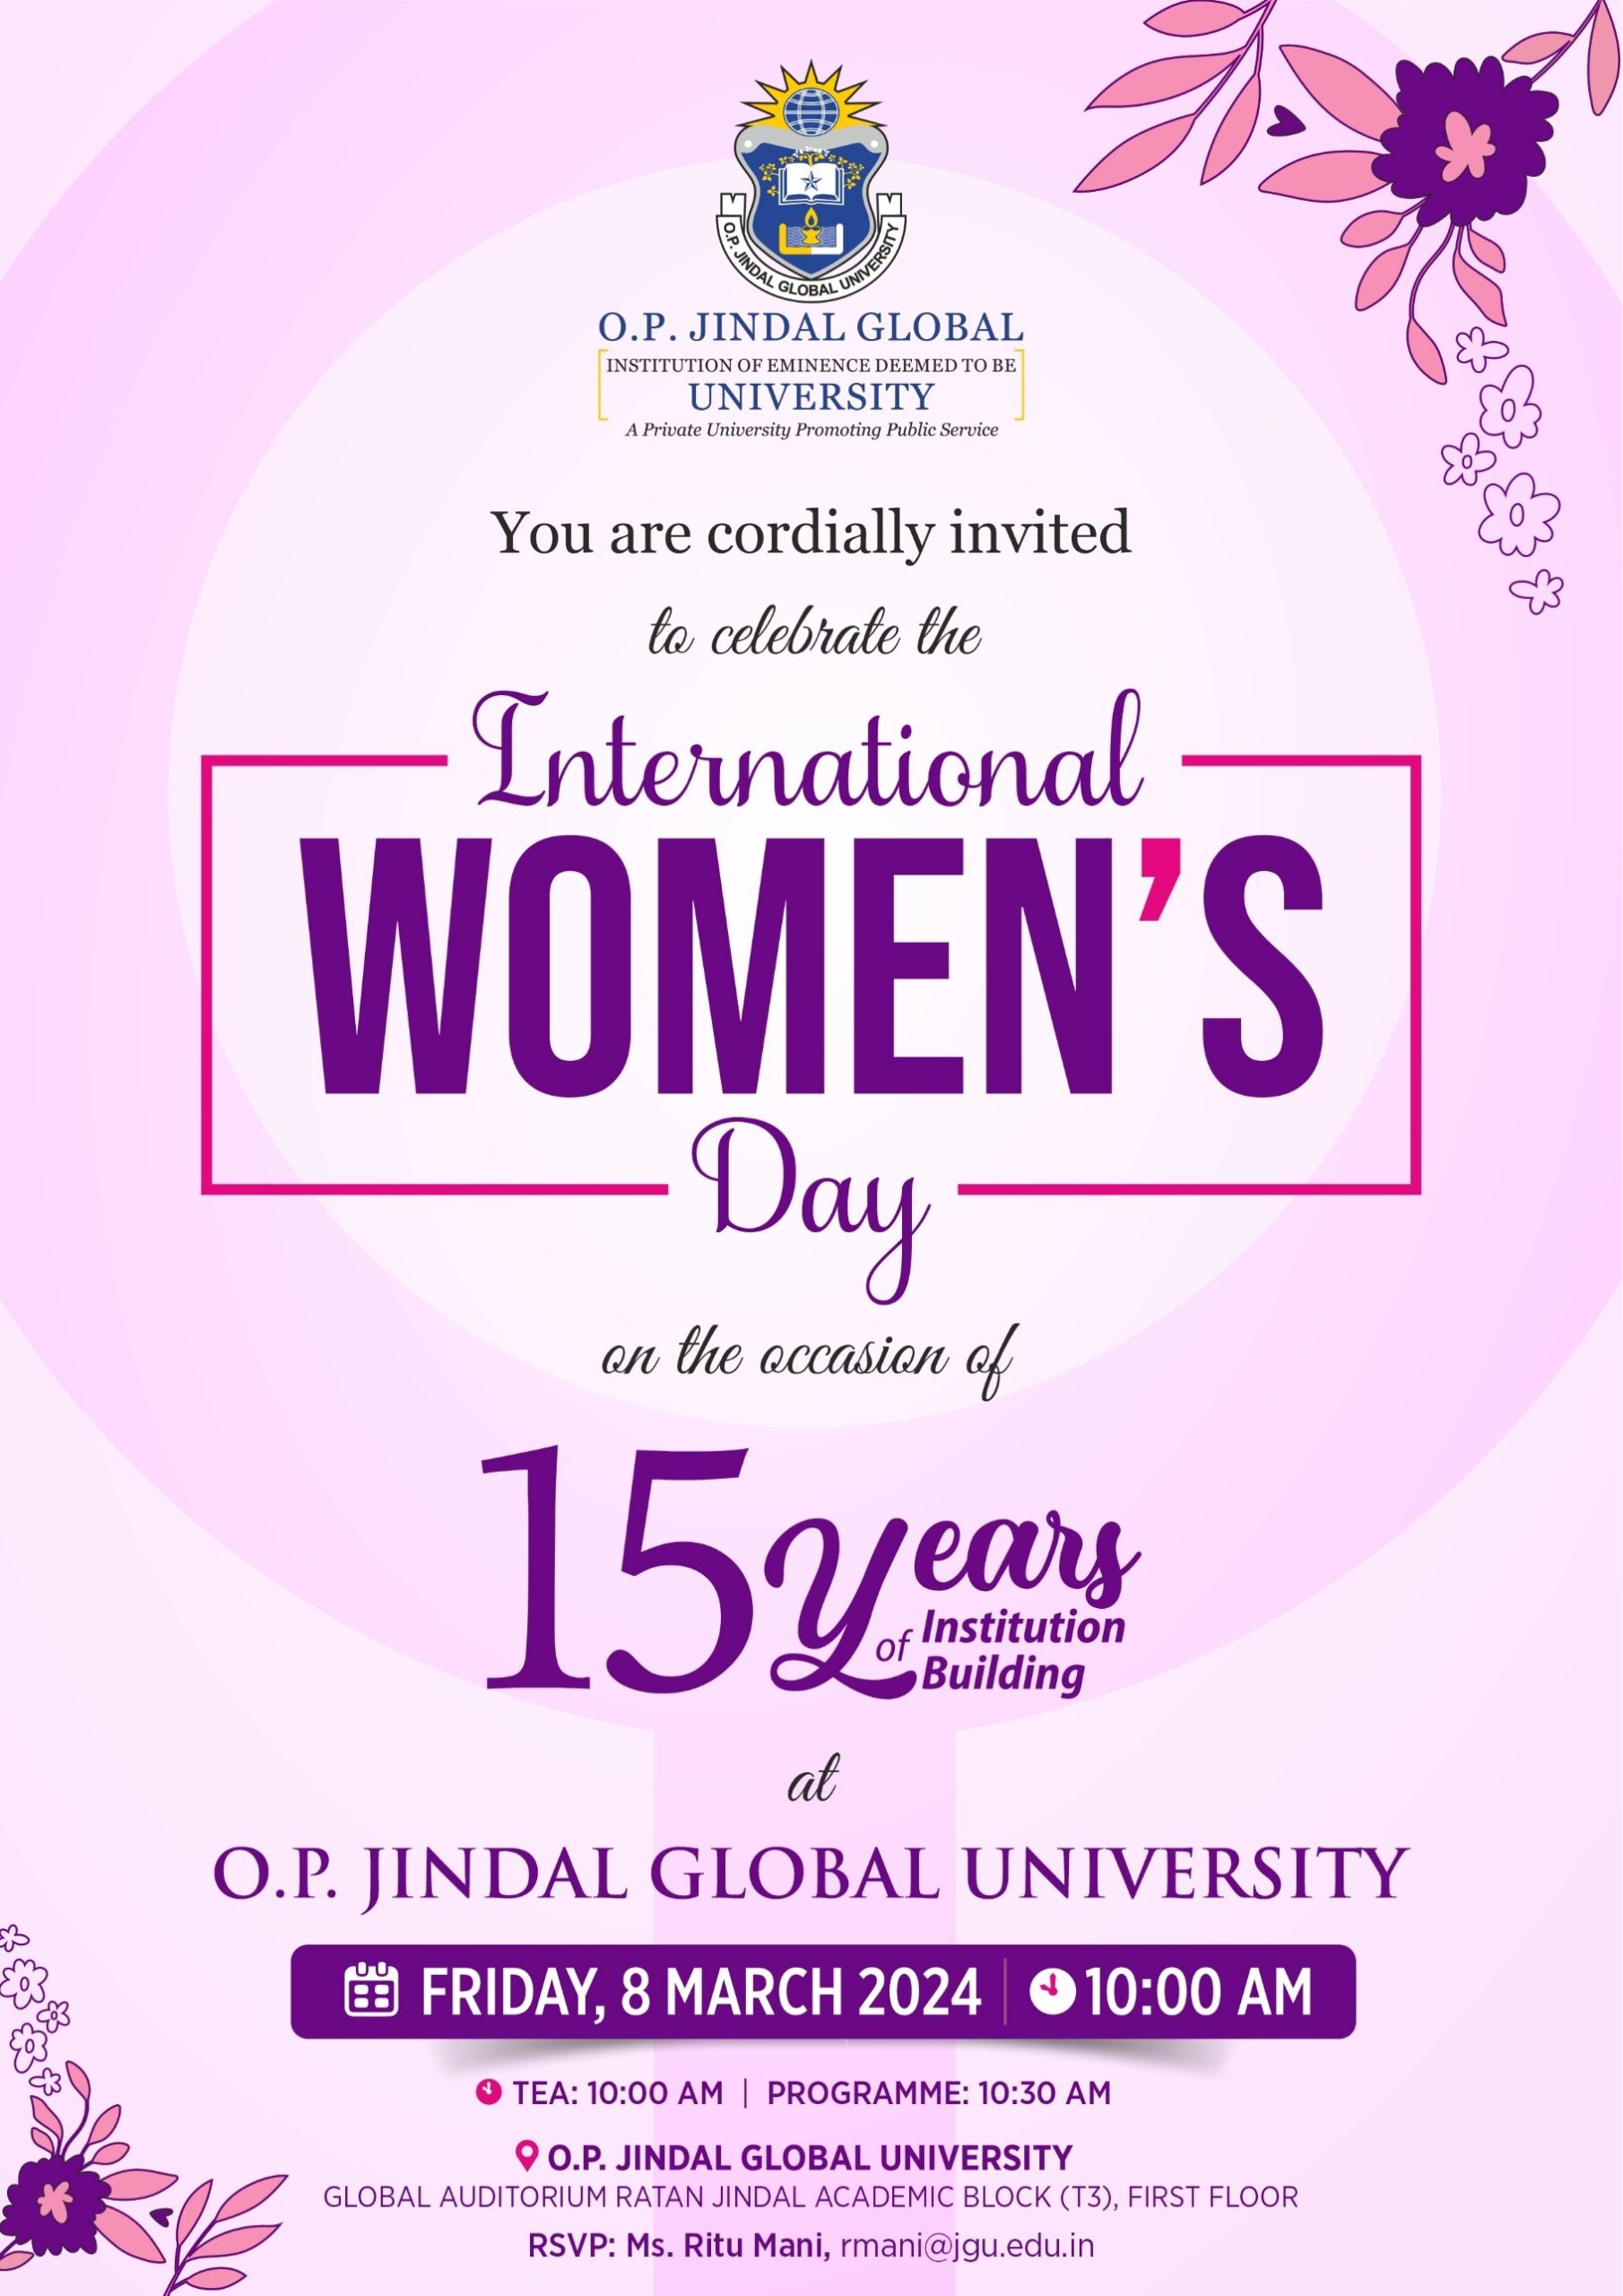 To celebrate the International Women's Day on the occasion of 15 years of Institution building